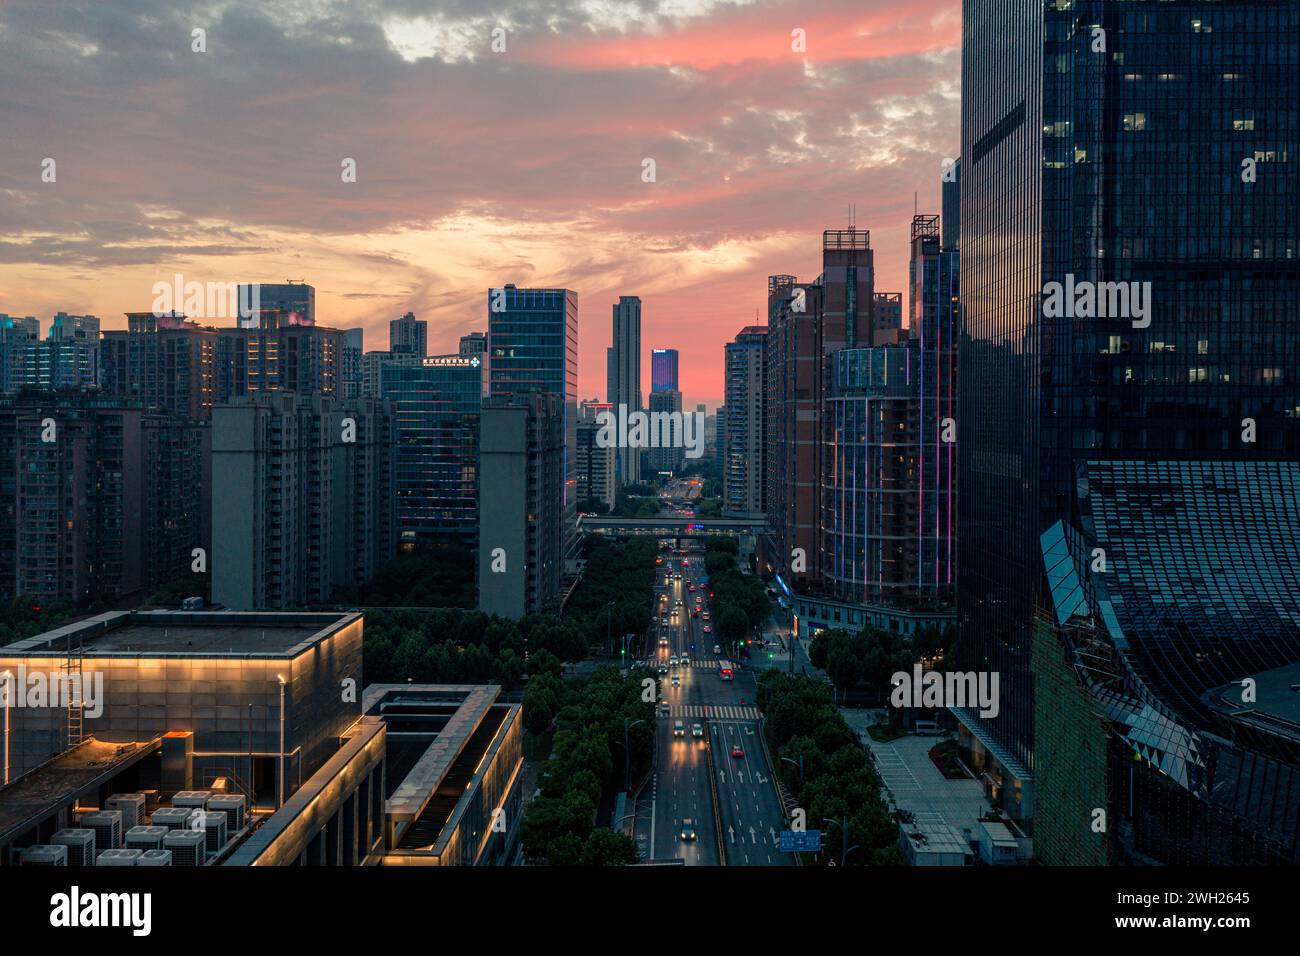 An aerial view of stunning skyscrapers in the central urban area of Wuhan, China. Stock Photo